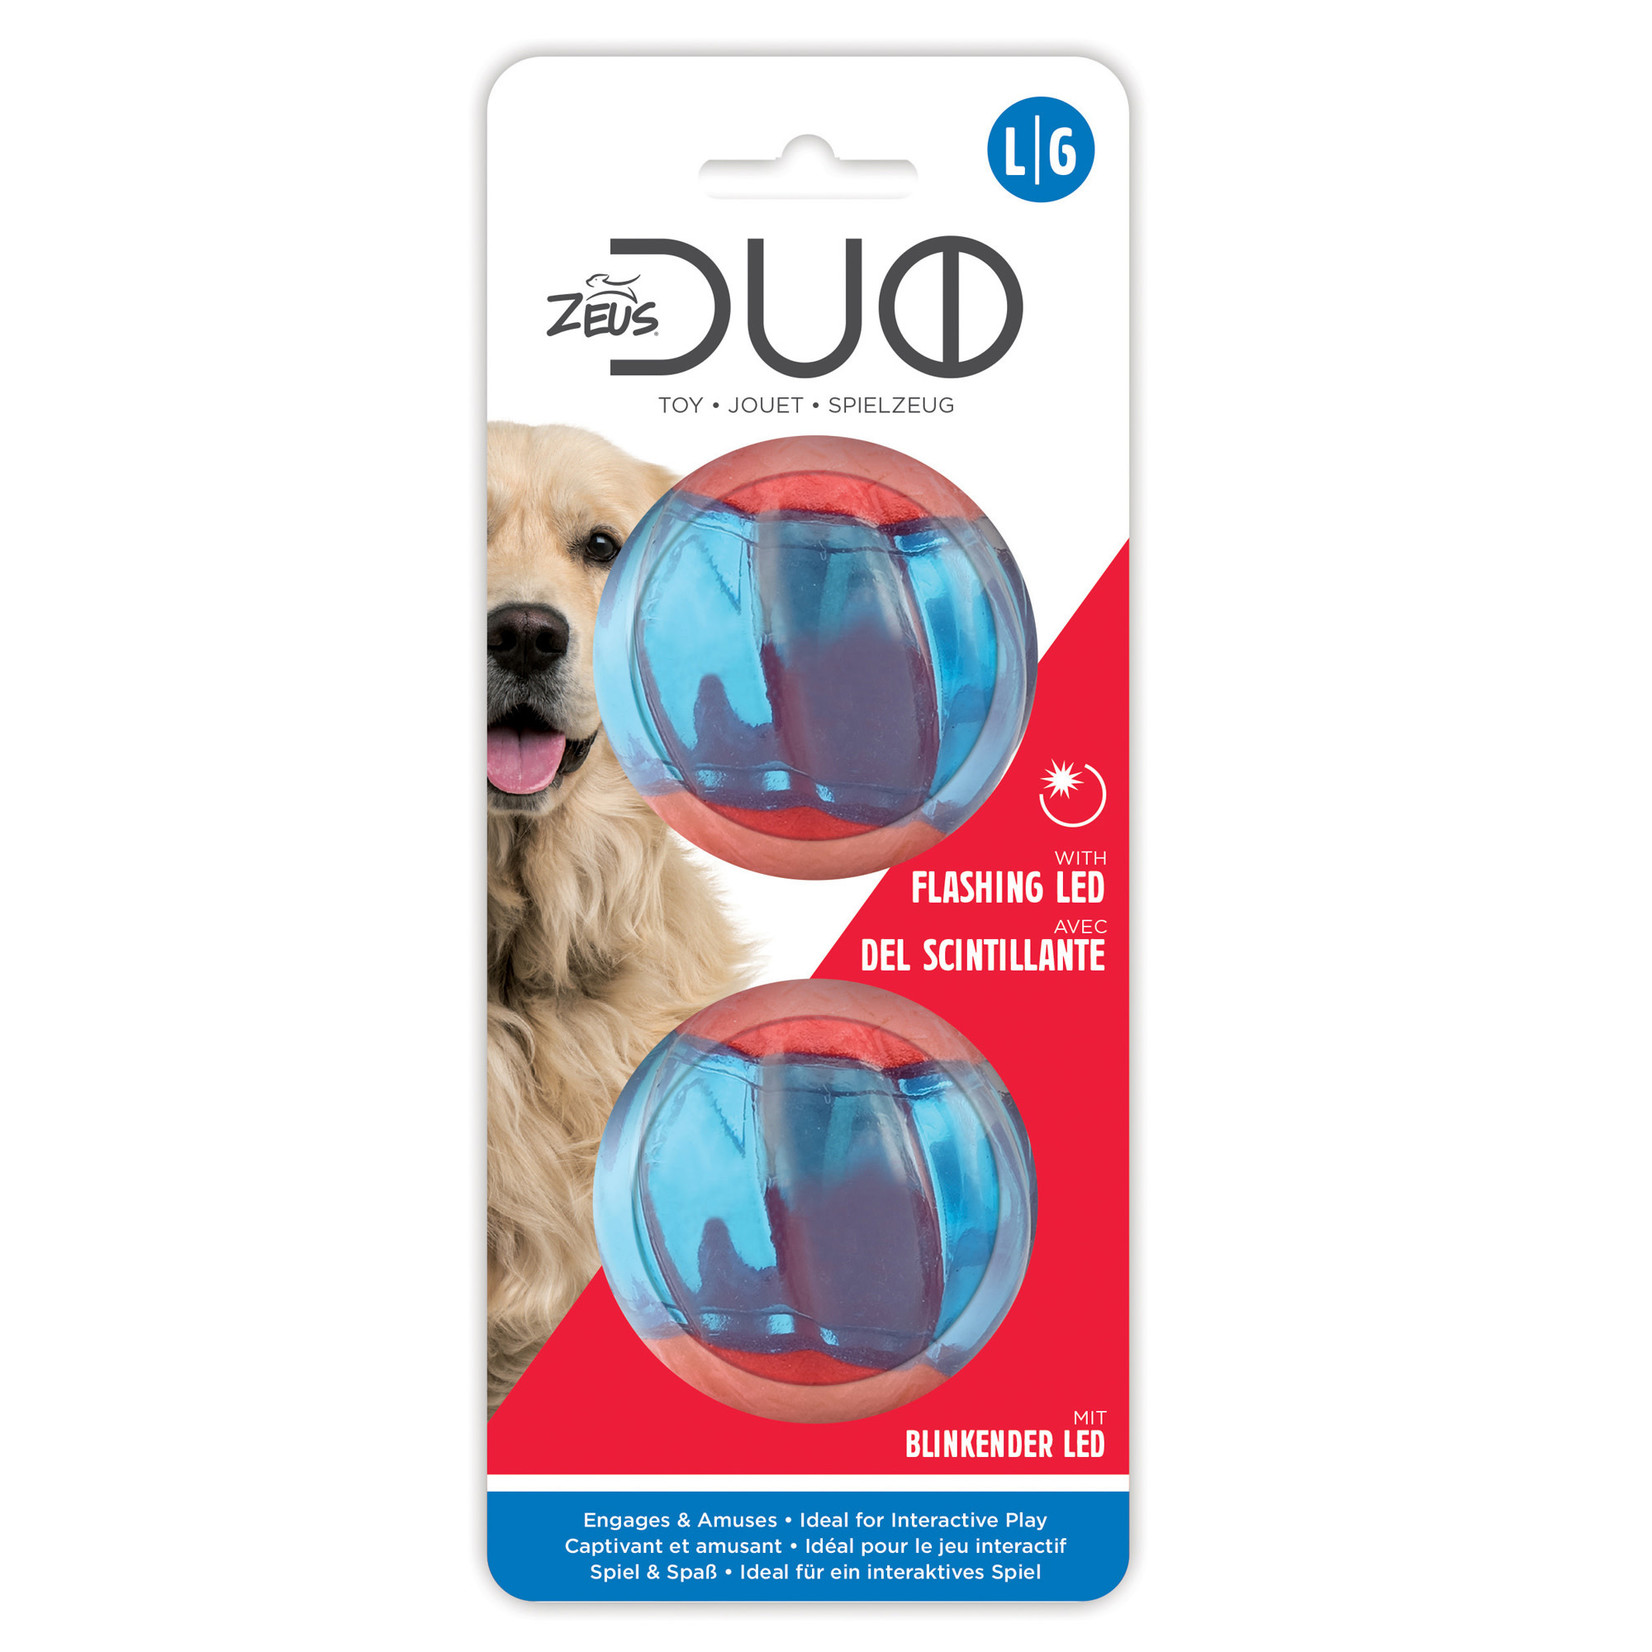 ZEUS (W) Zeus Duo Ball Dog Toy with Flashing LED - Large - 2 pack - 6.3 cm (2.5 in)